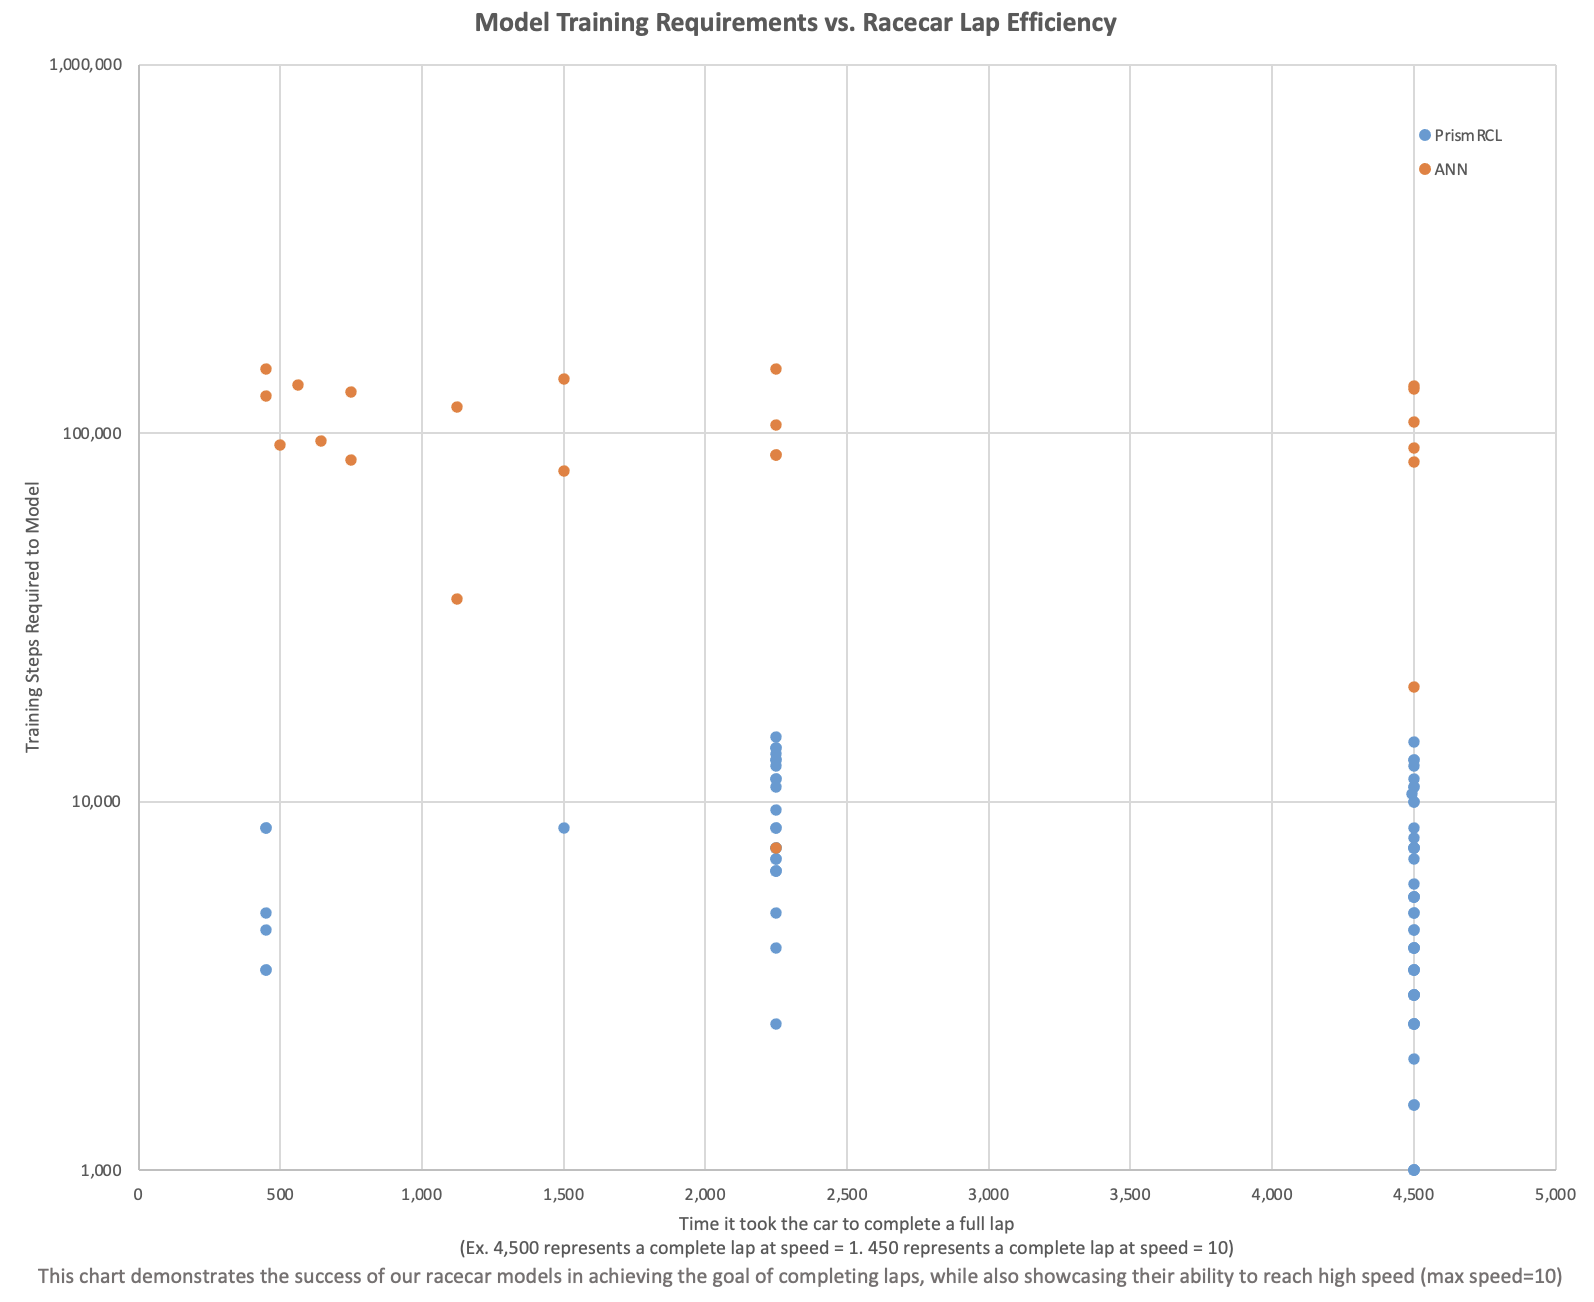 Graph that compares model training requirements of Lumina RCL and Artificial Neural Networks and the time taken to complete a full lap.